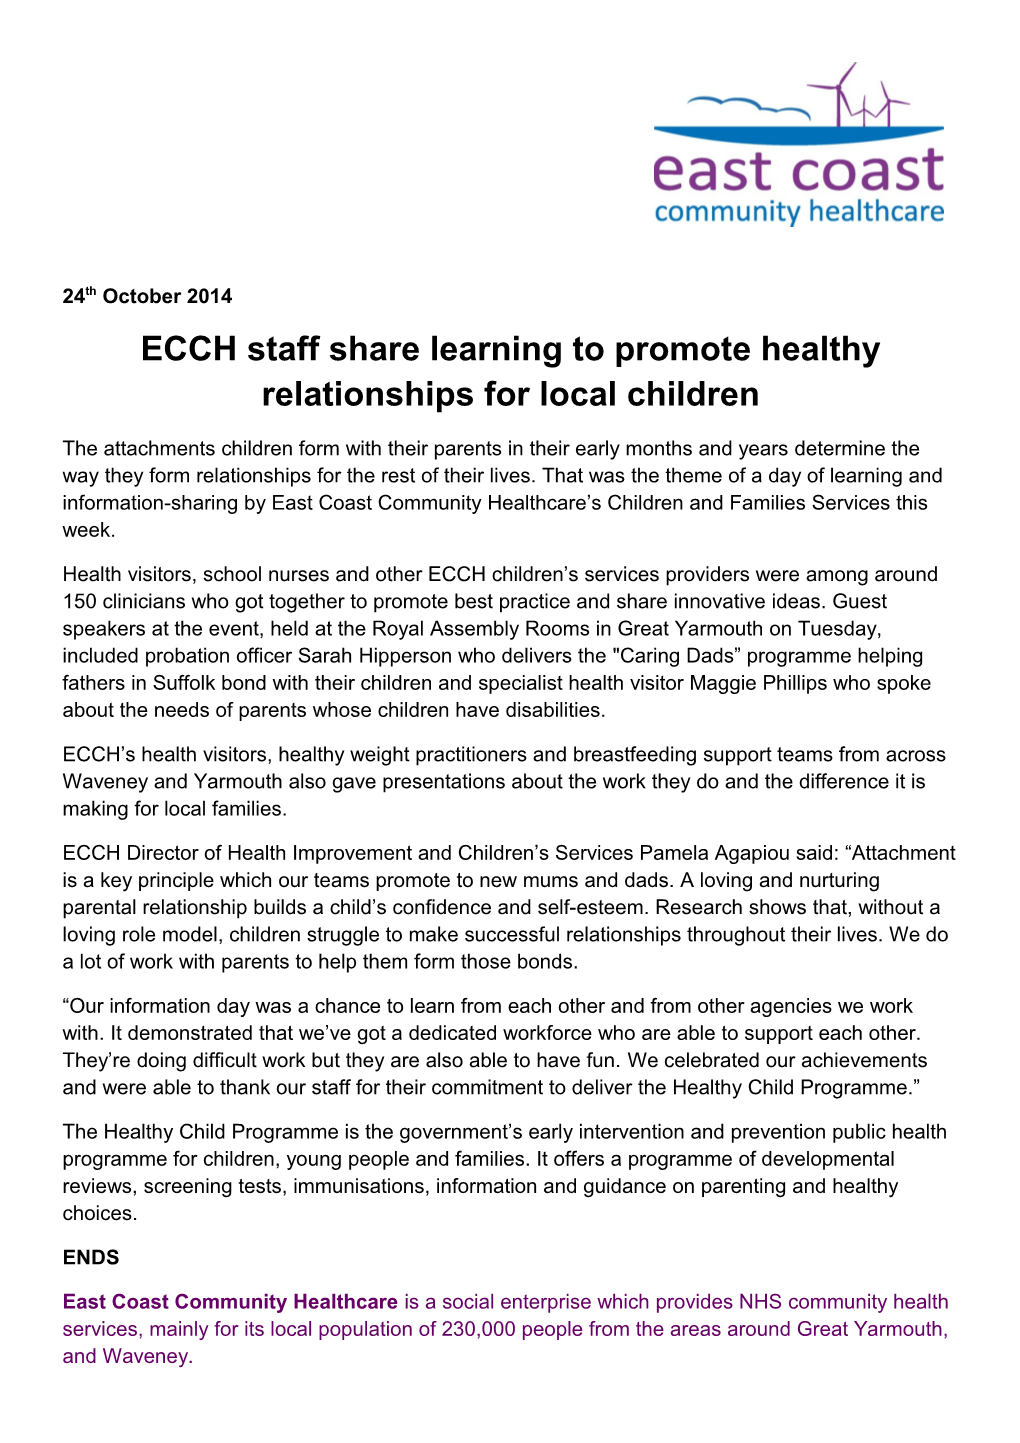 ECCH Staff Share Learning to Promote Healthy Relationships for Local Children